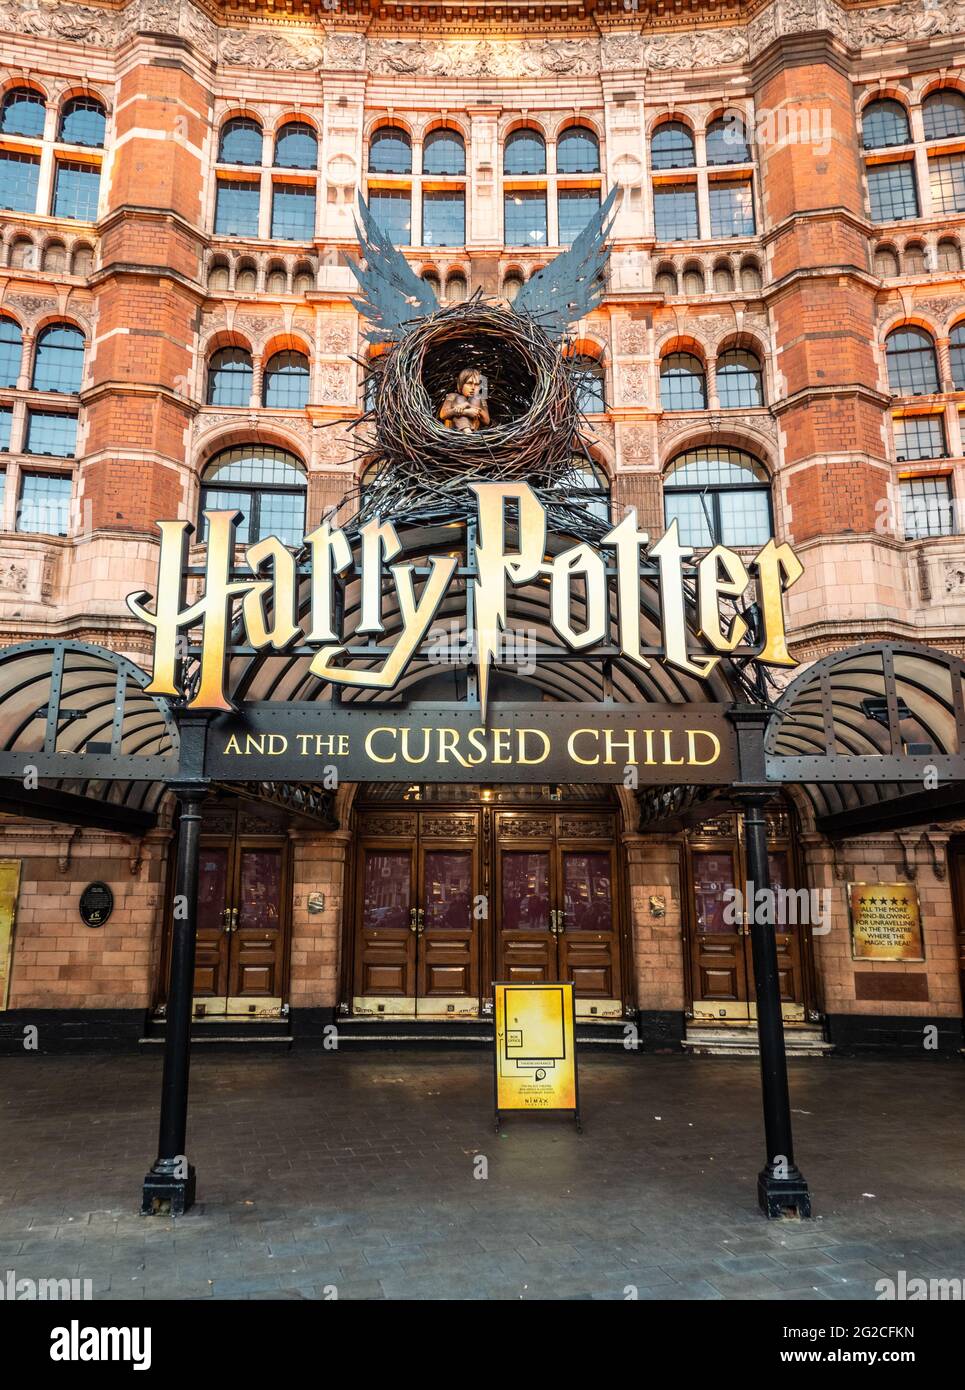 The Palace Theatre, West End, London. The façade to the theatre in London's Theatre District where Harry Potter and the Cursed Child is in production. Stock Photo